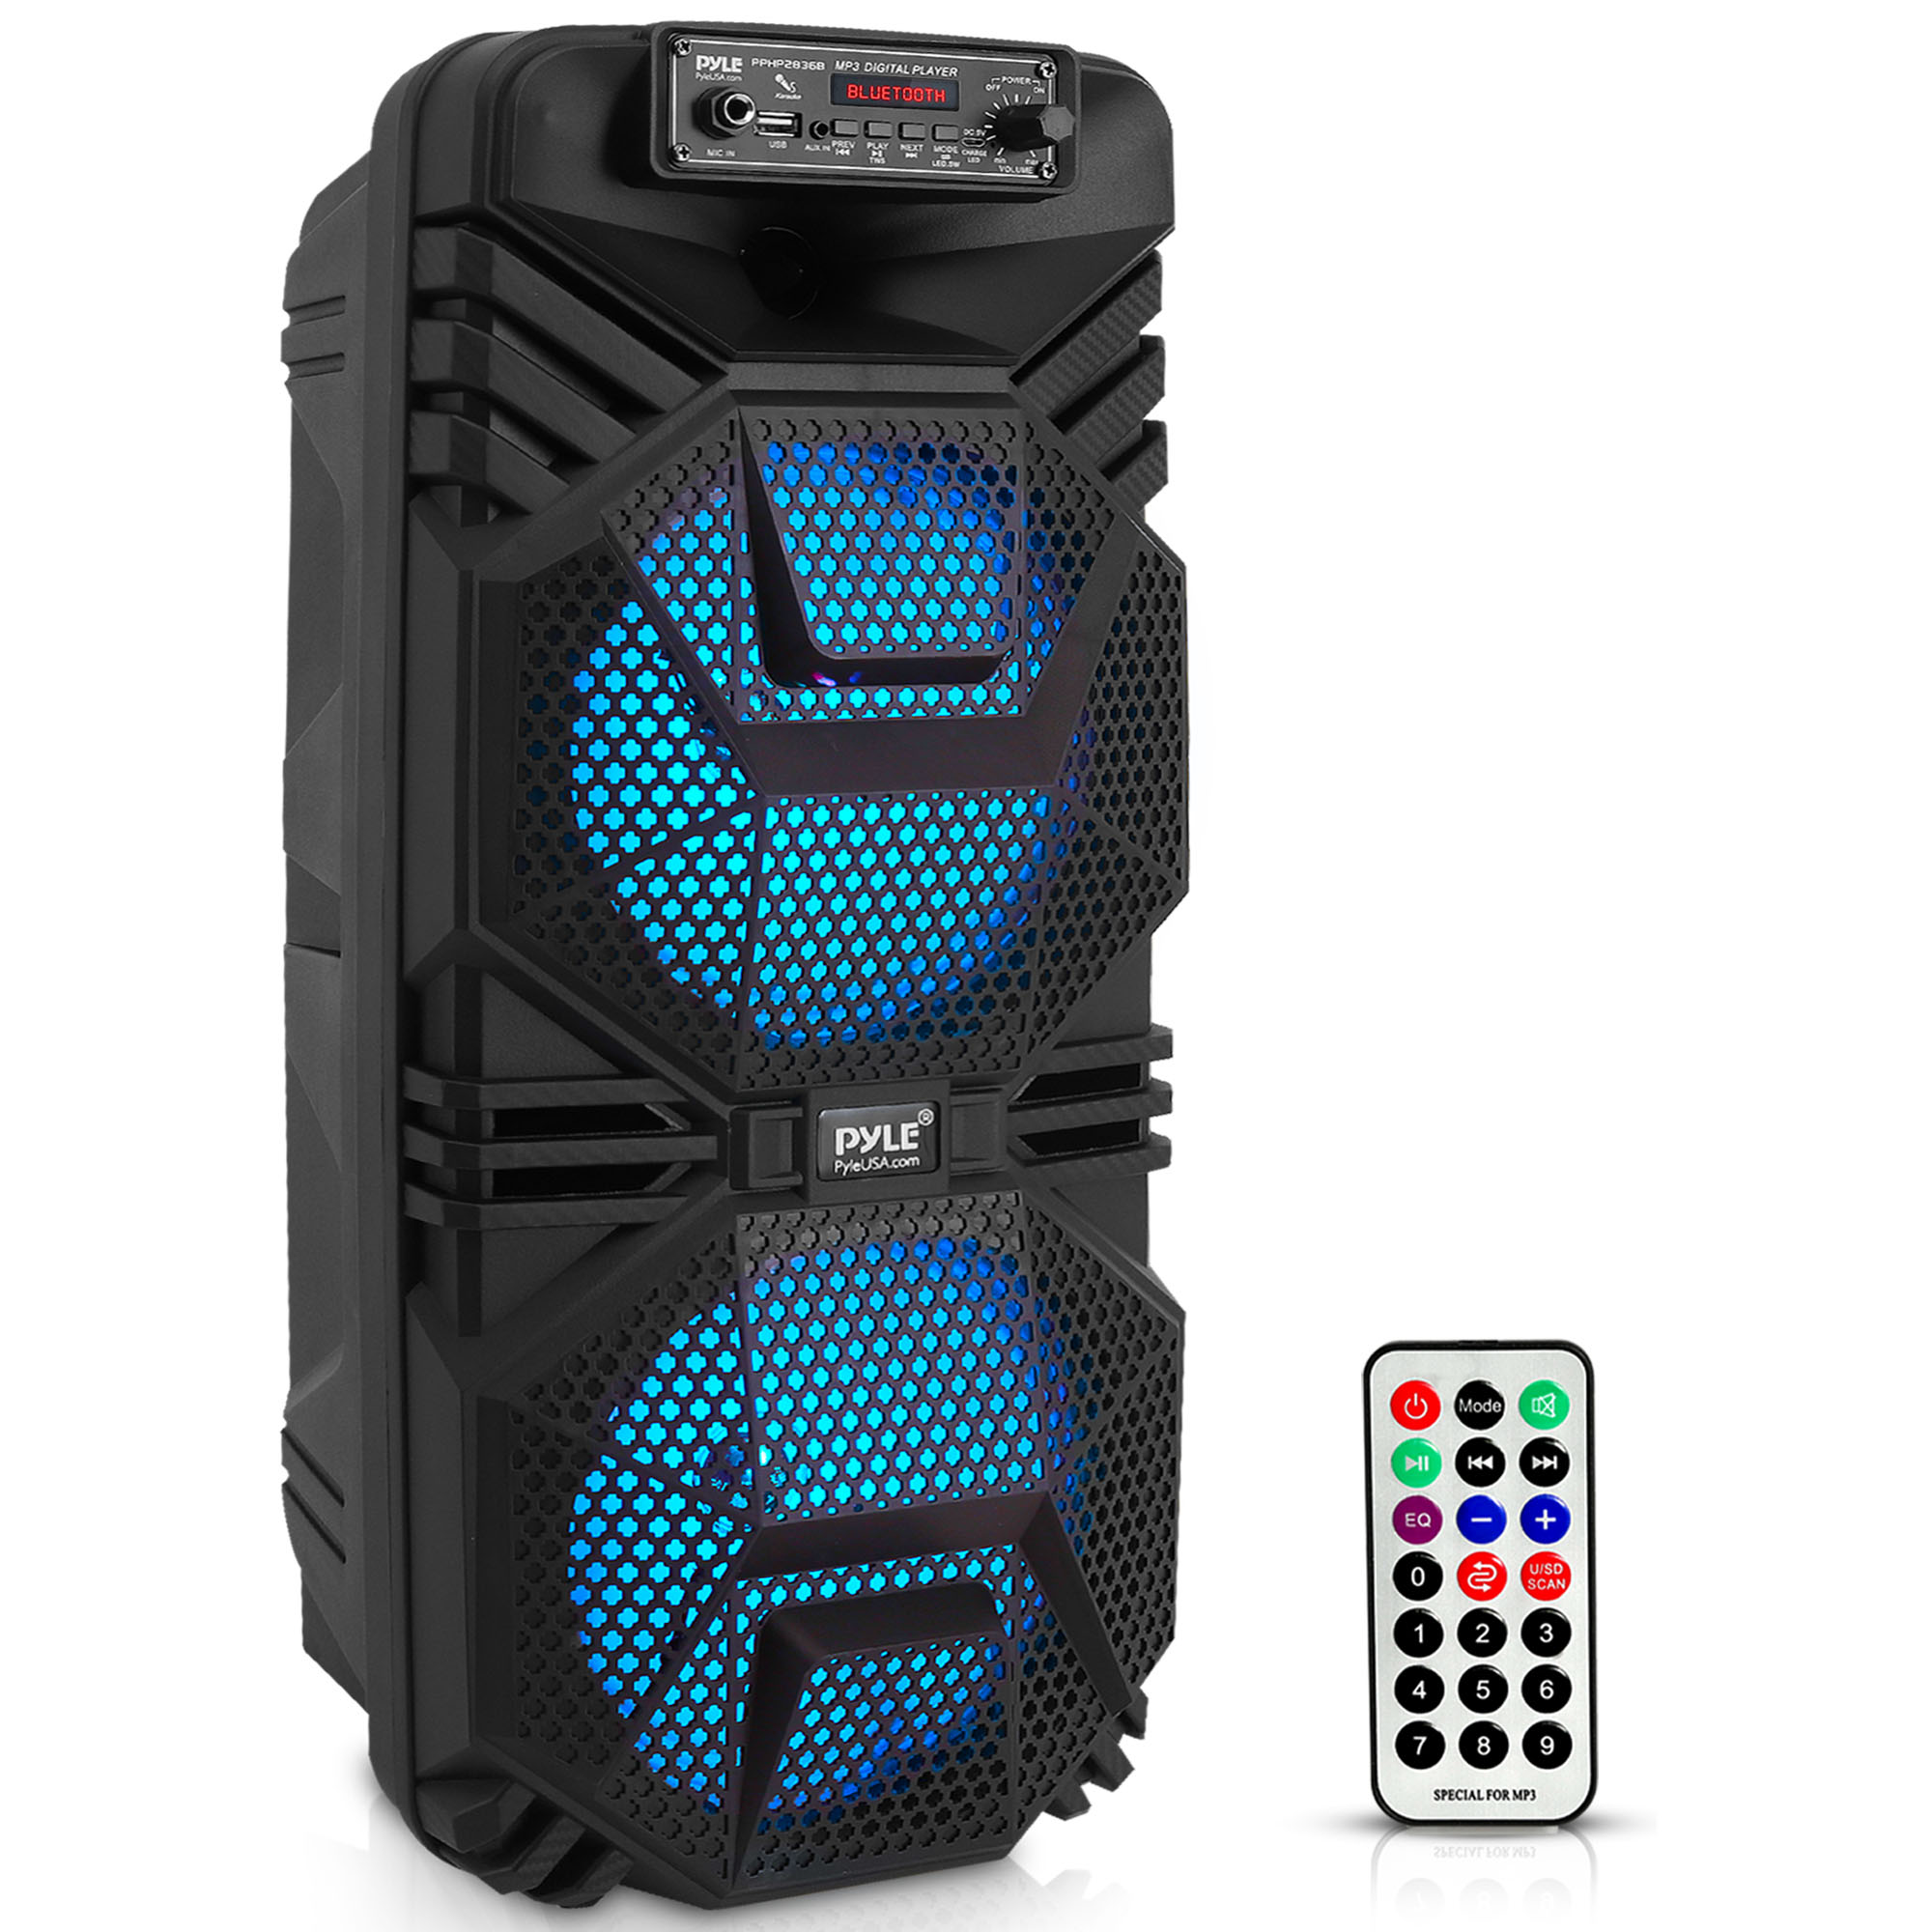 Pyle Dual 8’’ Bluetooth Portable PA Speaker - Portable PA & Karaoke Party Audio Speaker with Built-in Rechargeable Battery, Flashing Party Lights, MP3/USB/ /FM Radio (600 Watt MAX) - image 1 of 3